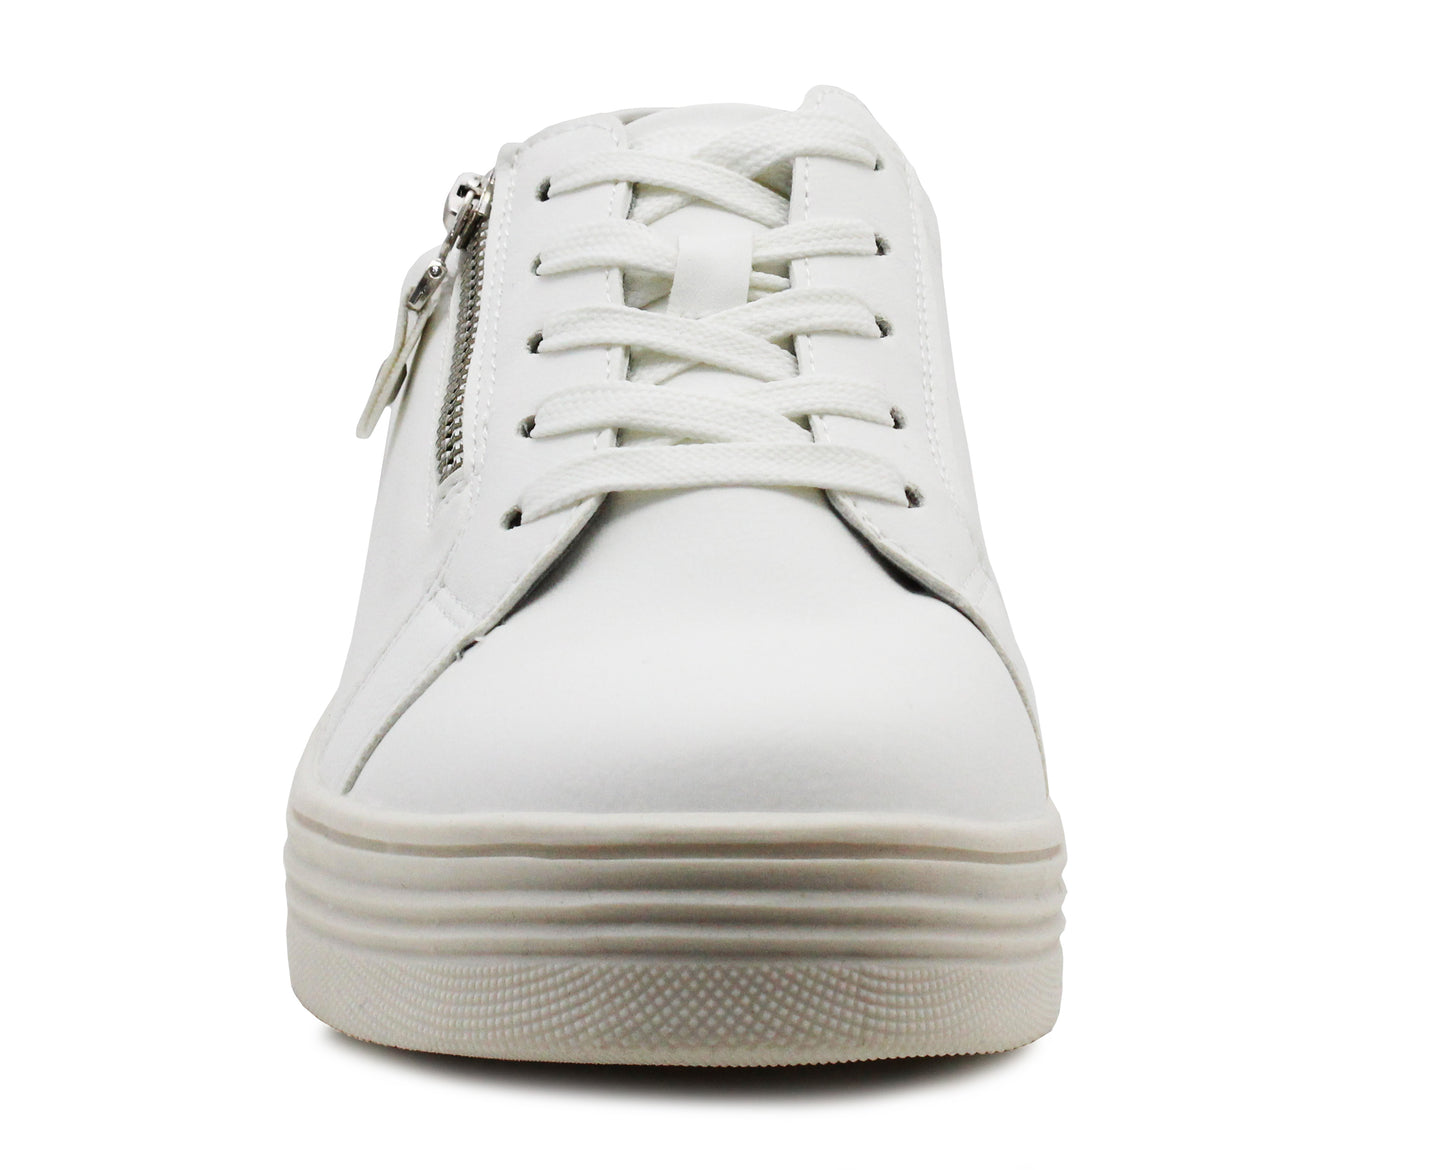 Womens Casual Lace Up White Fashion Trainers Side Zip Fastening Sneaker Shoes